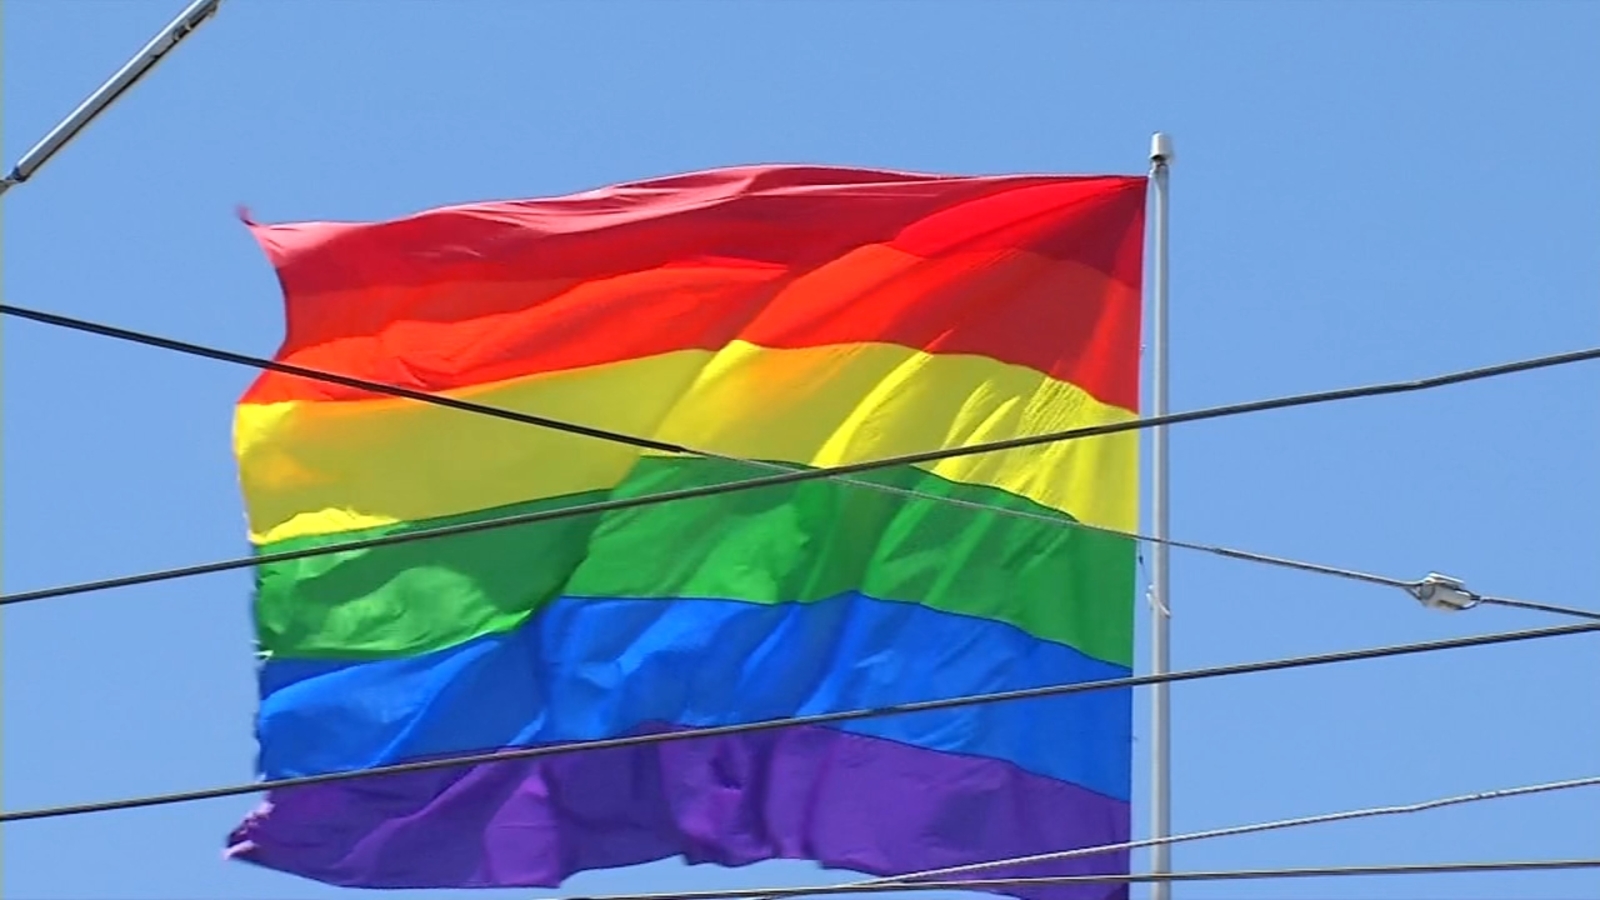 San Francisco Bay Area LGBTQ+ communities kick off Pride Month with